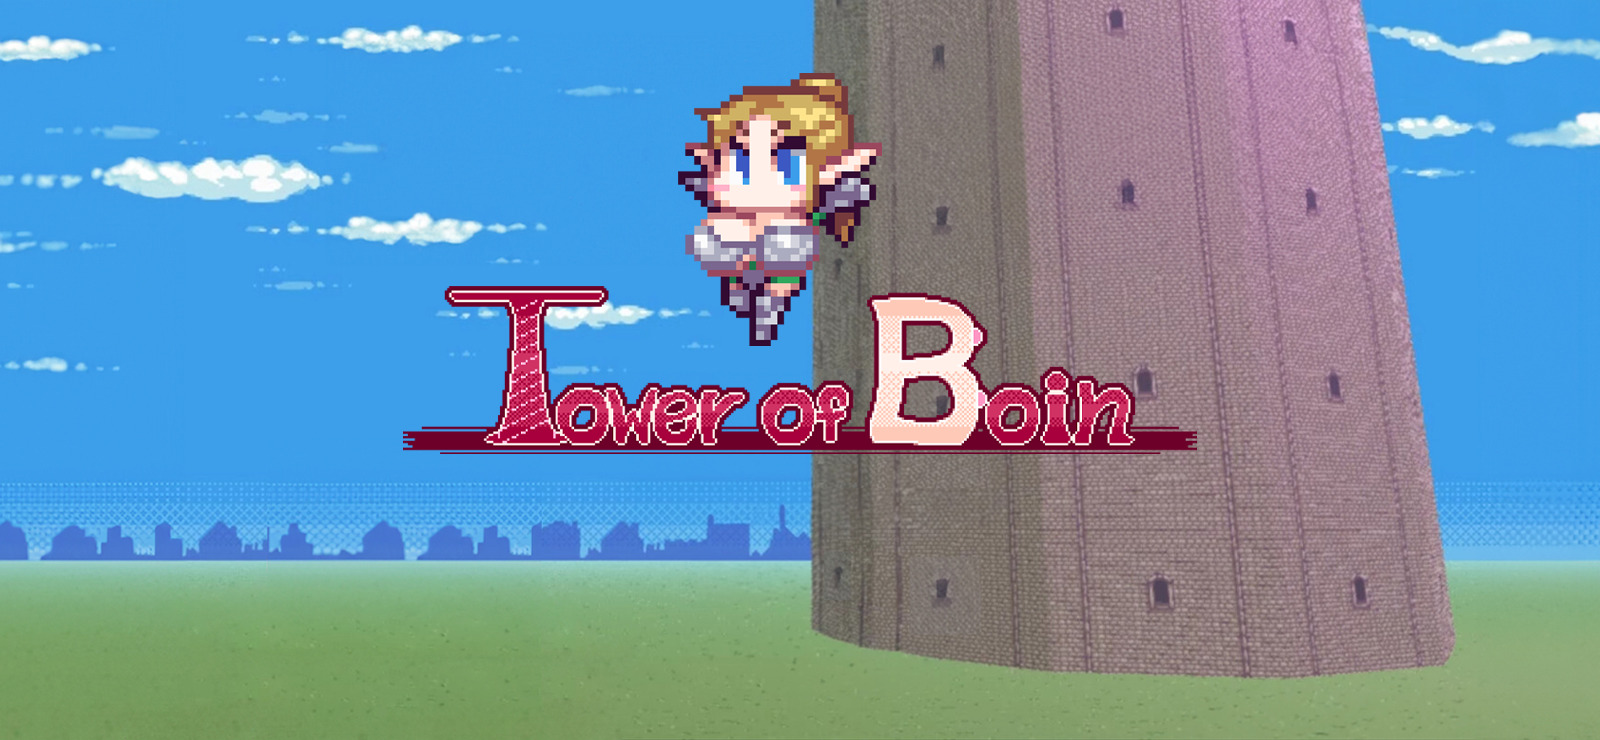 Tower of boin